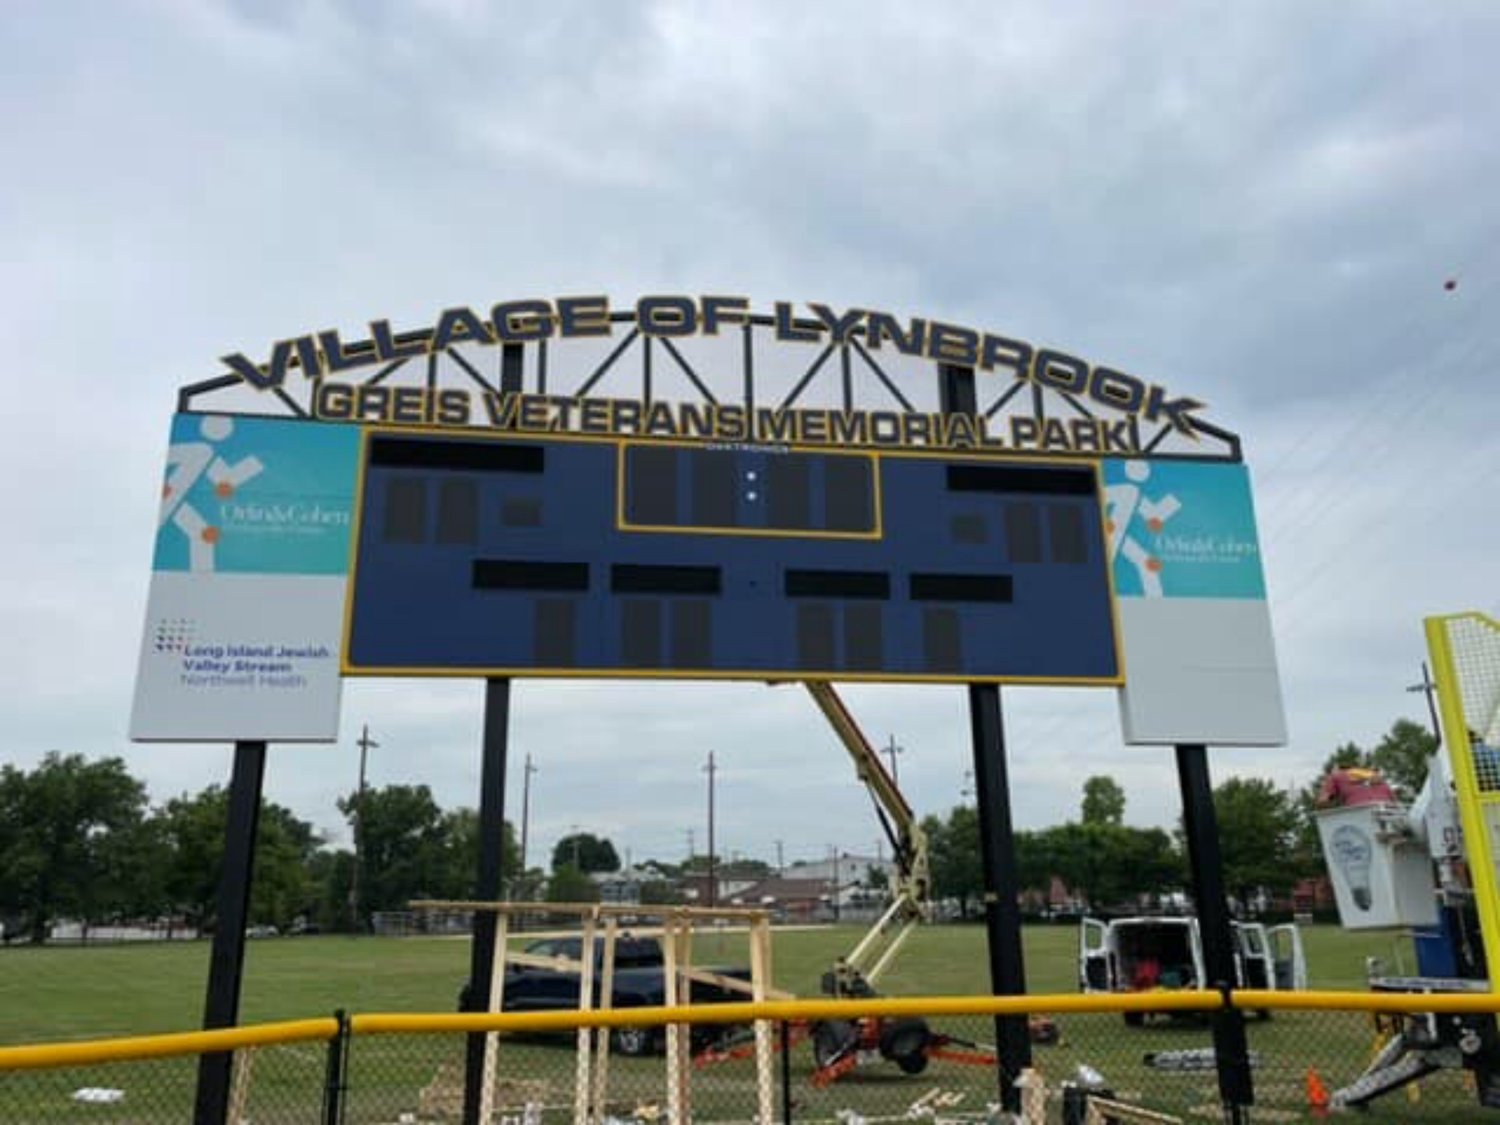 Greis Park’s beatification continued with a new scoreboard.